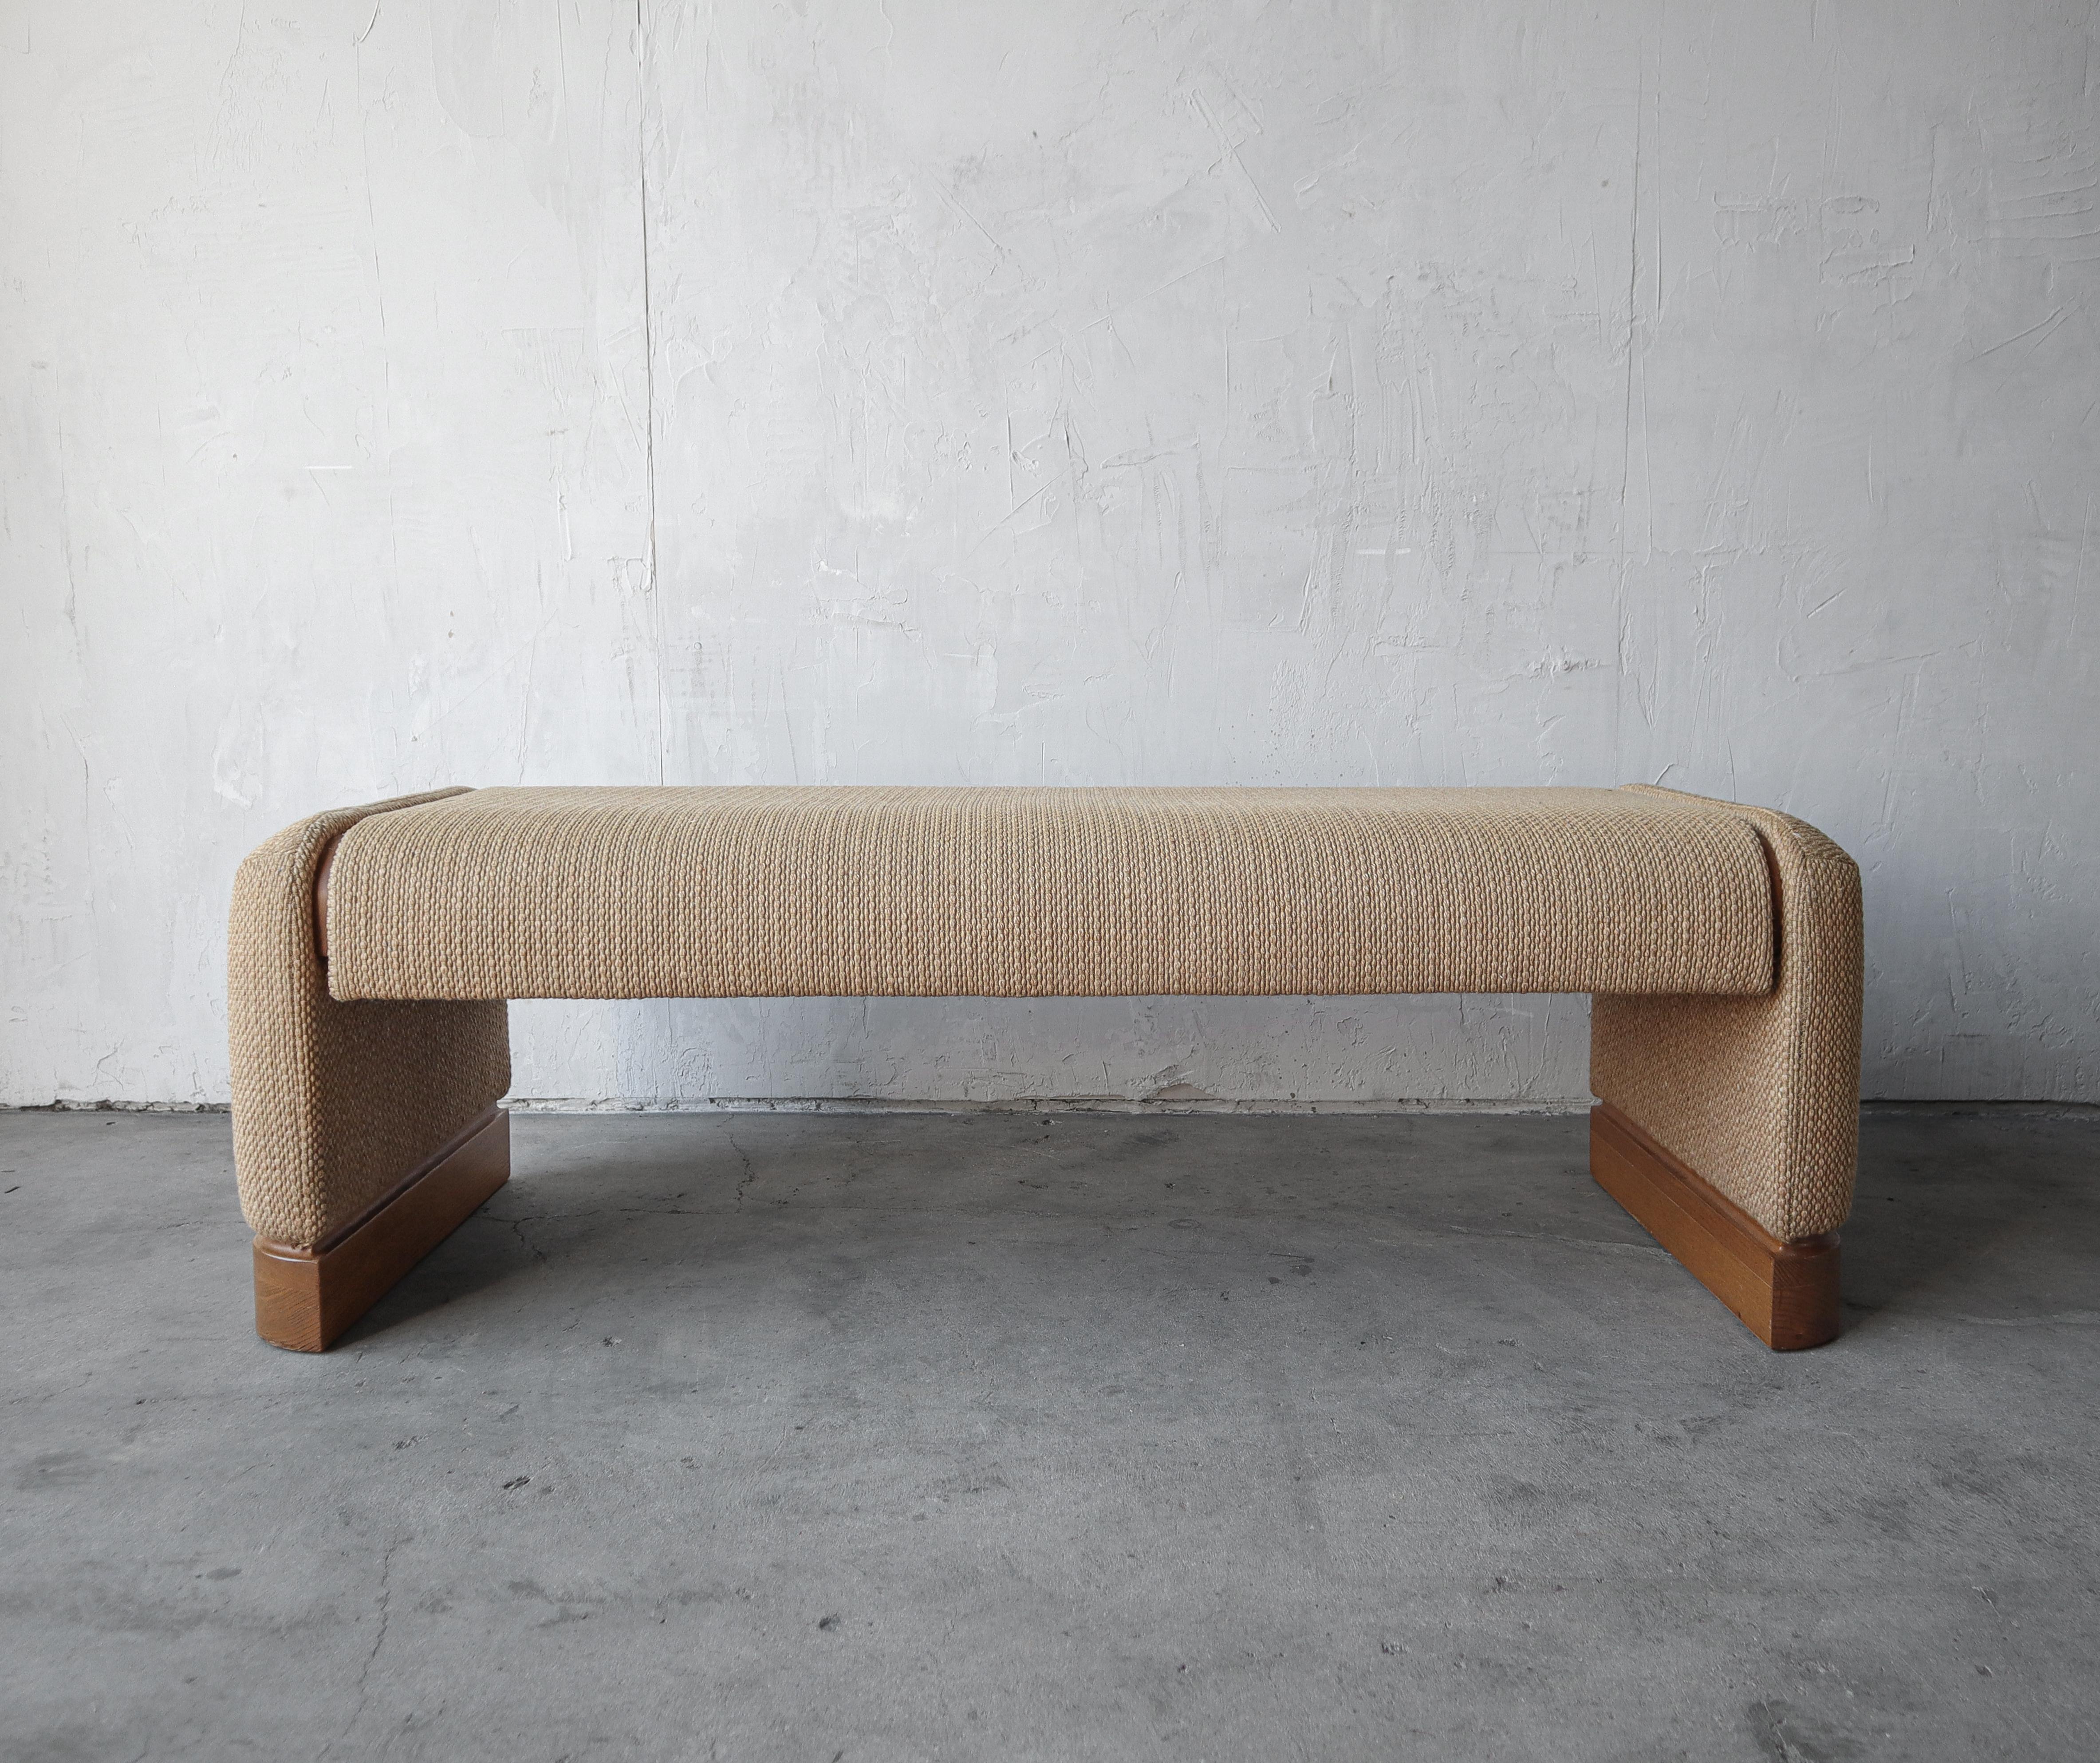 Super minimalist bench with nice chunky tweed fabric and oak accents.  This bench is very heavy and VERY well made, feels like contract furniture quality.

Left as found in great vintage condition.  Fabric is useable, free of any stains, marks,